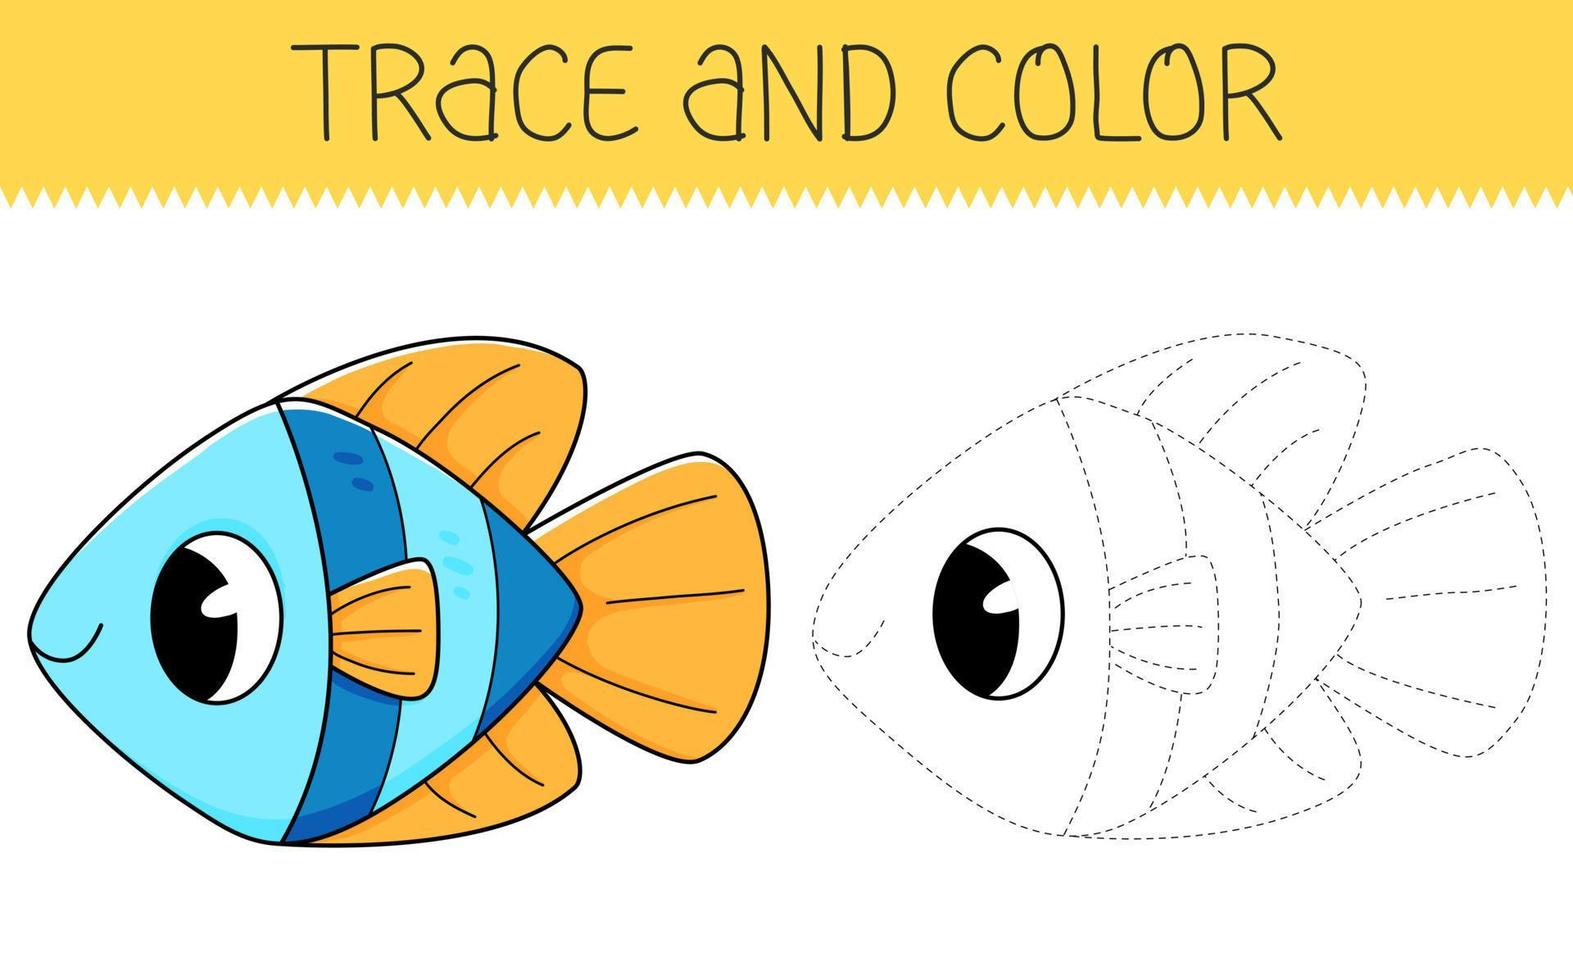 Trace and color coloring book with cute fish for kids. Coloring page with cartoon fish vector